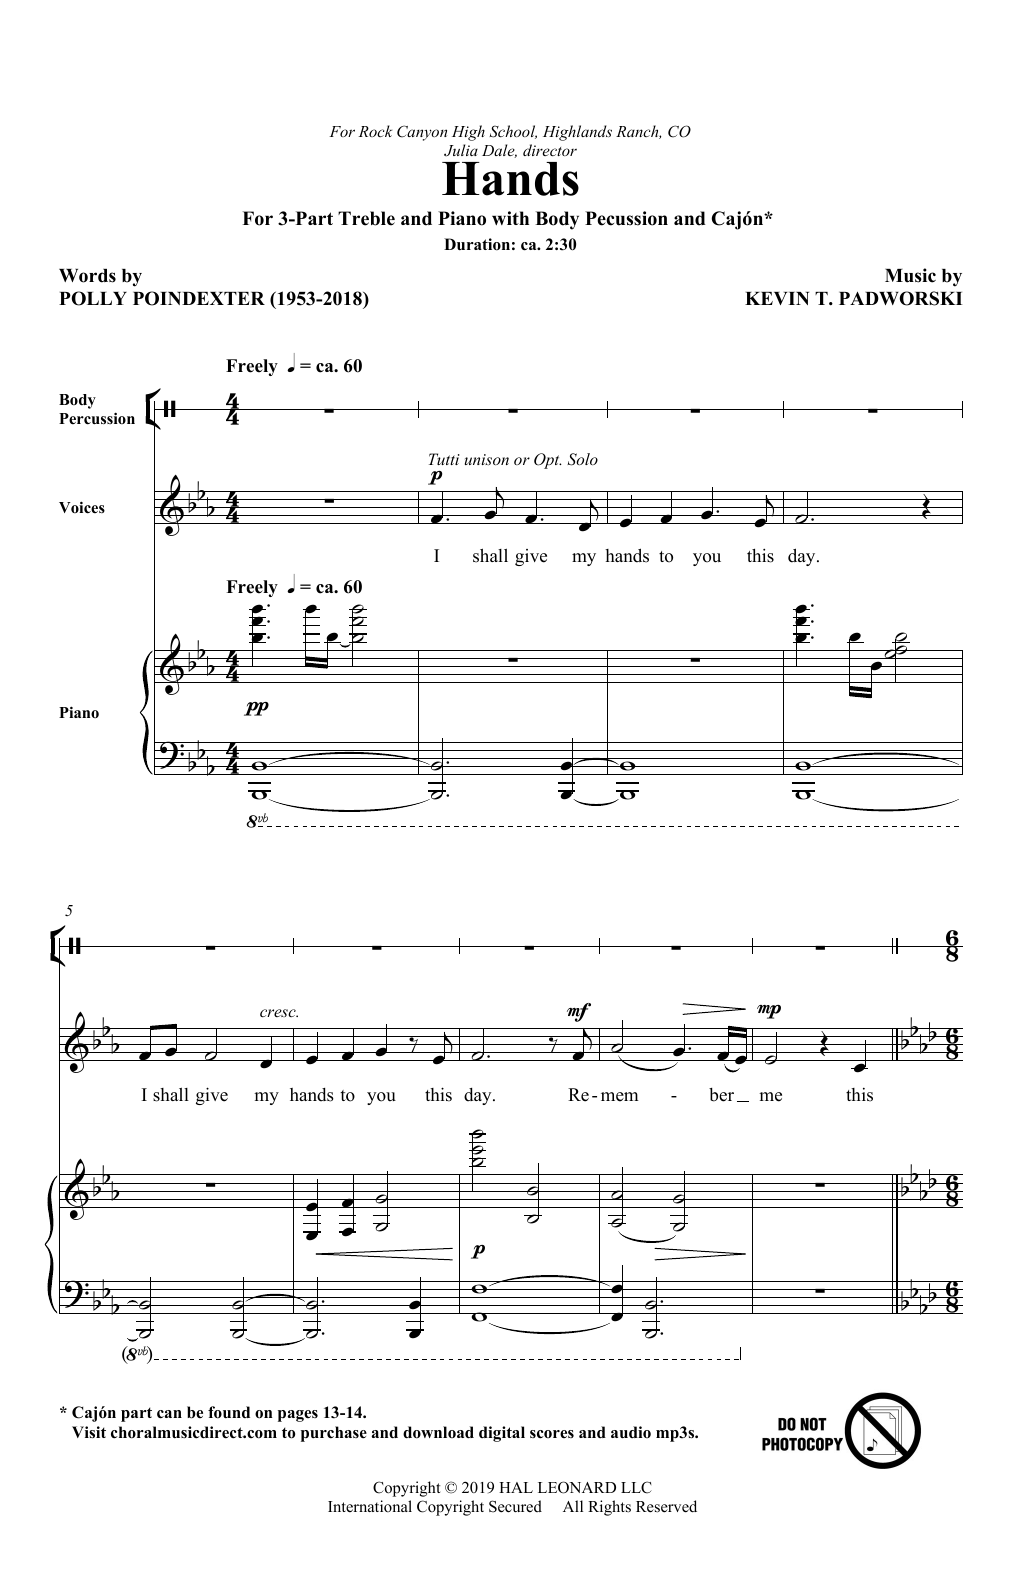 Download Polly Poindexter and Kevin T. Padwor Hands Sheet Music